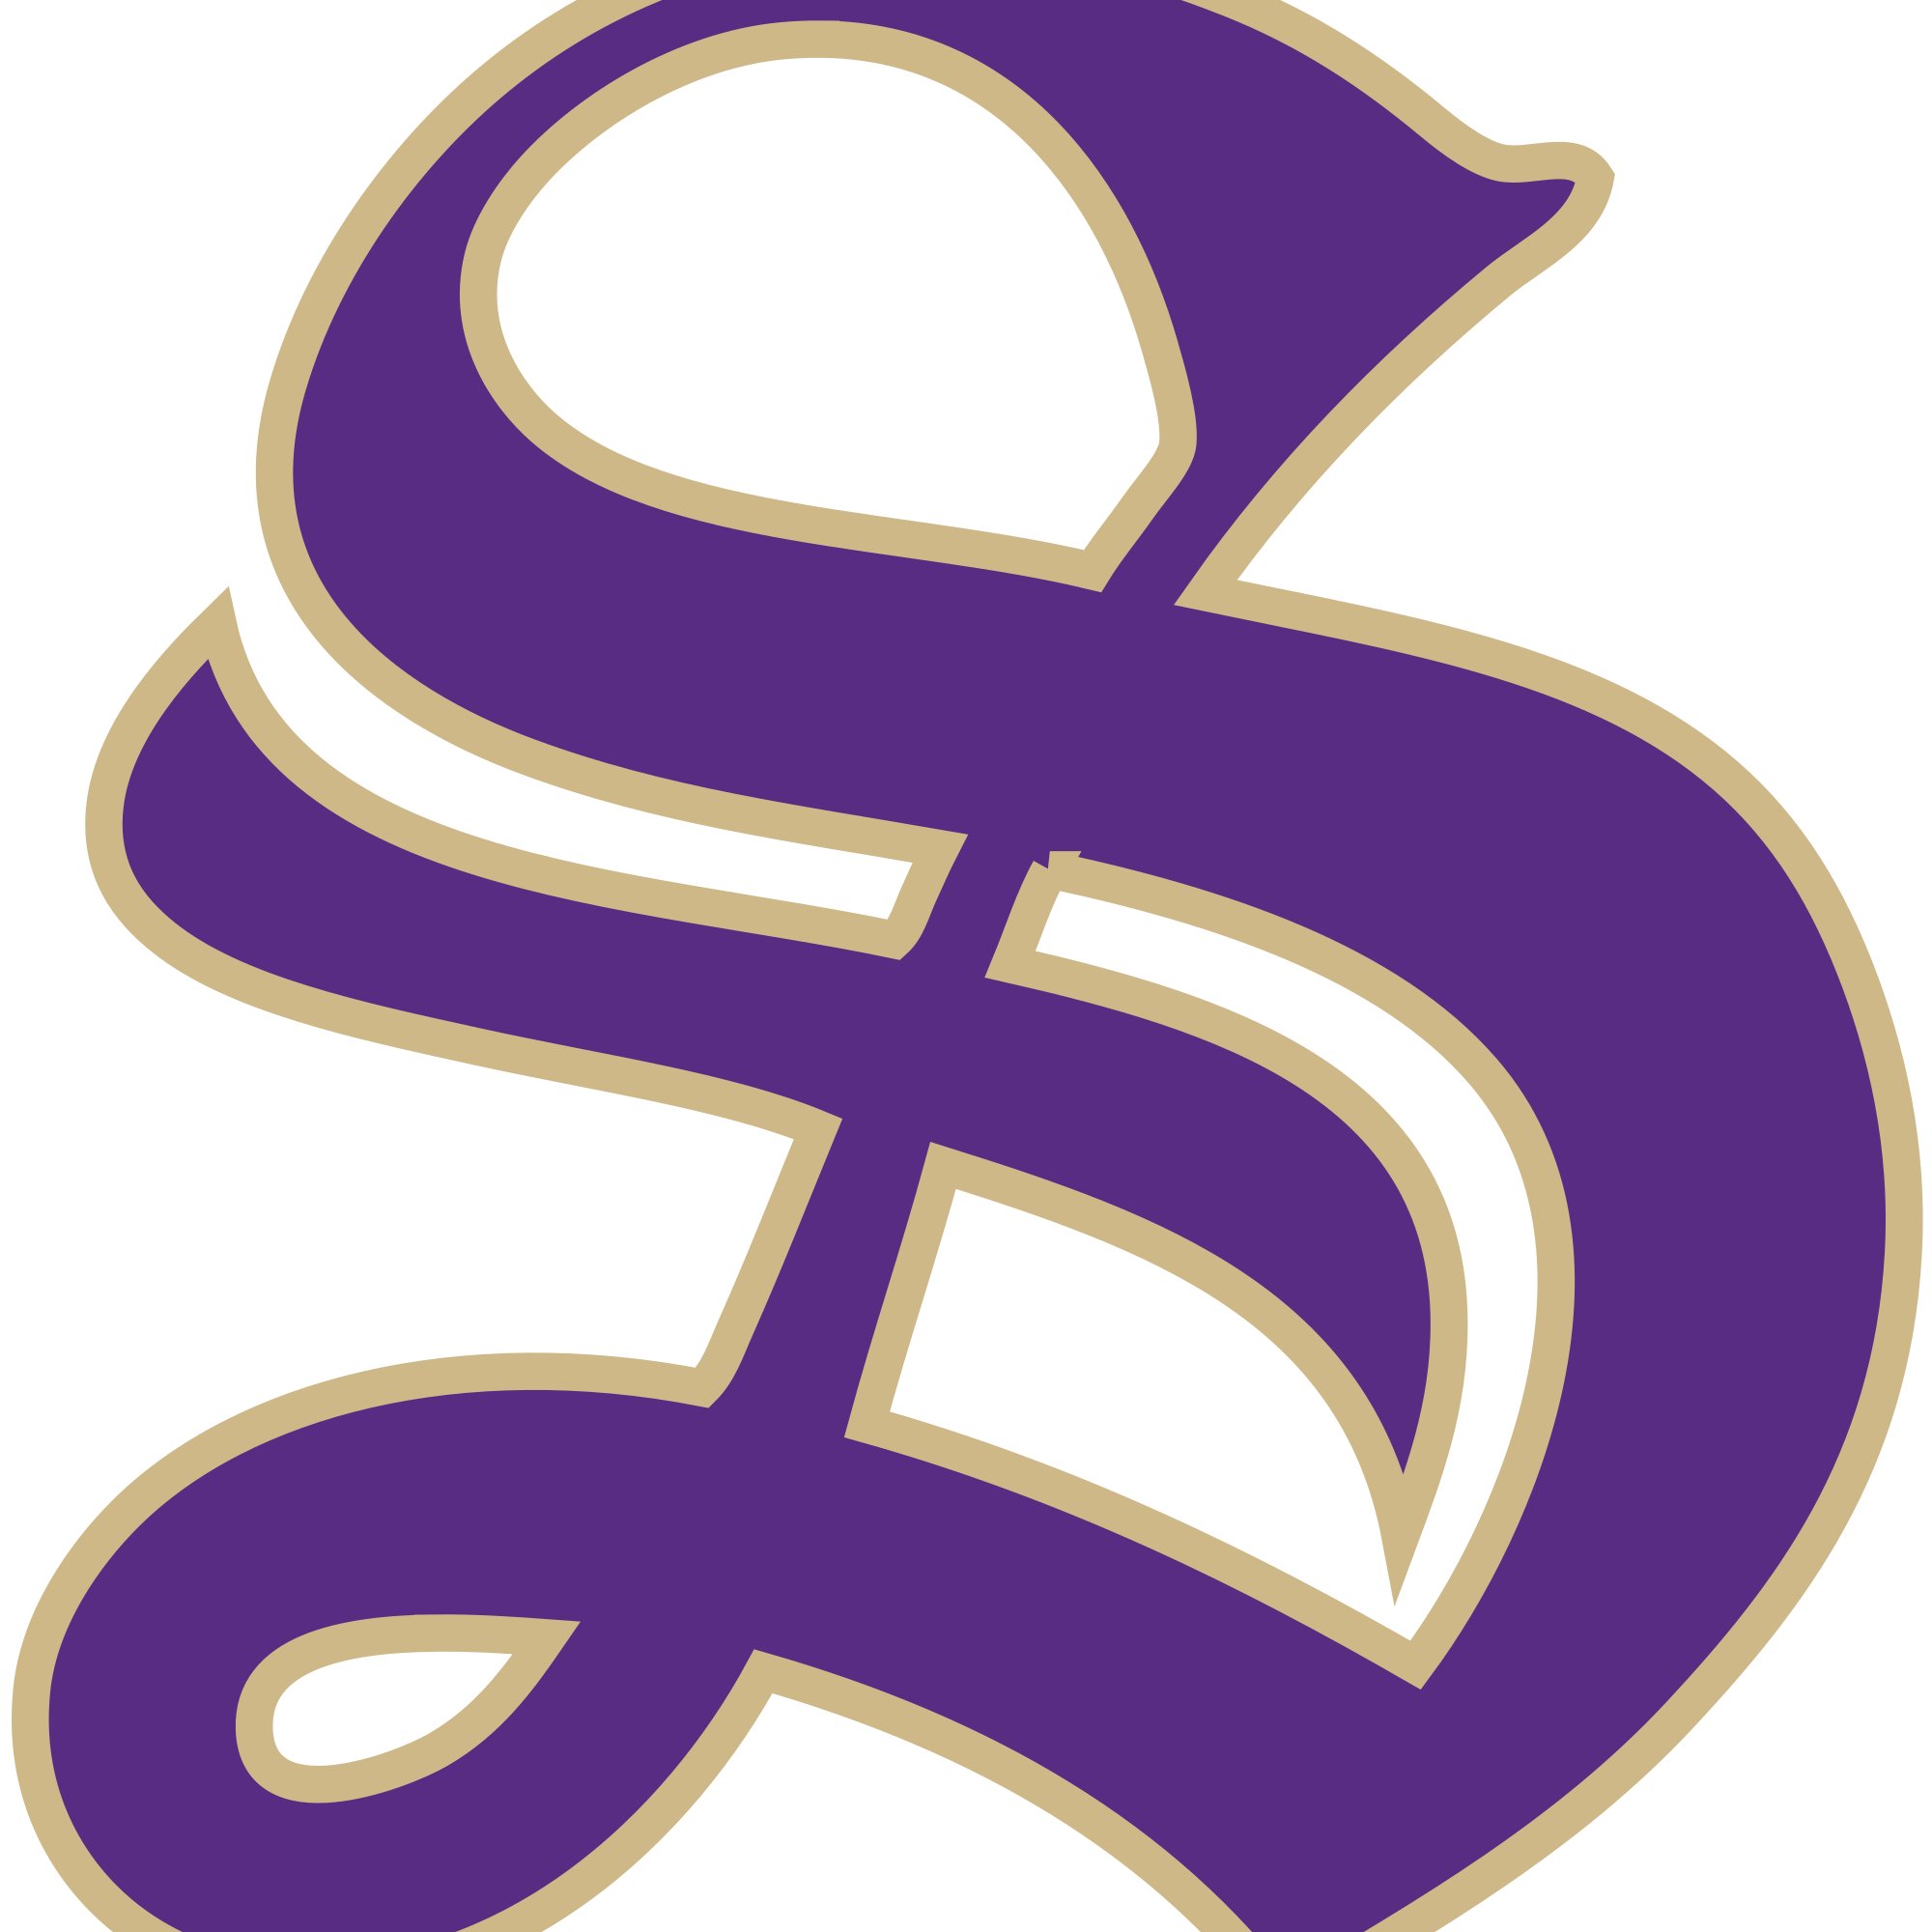 Head Volleyball Coach at University of the South Sewanee